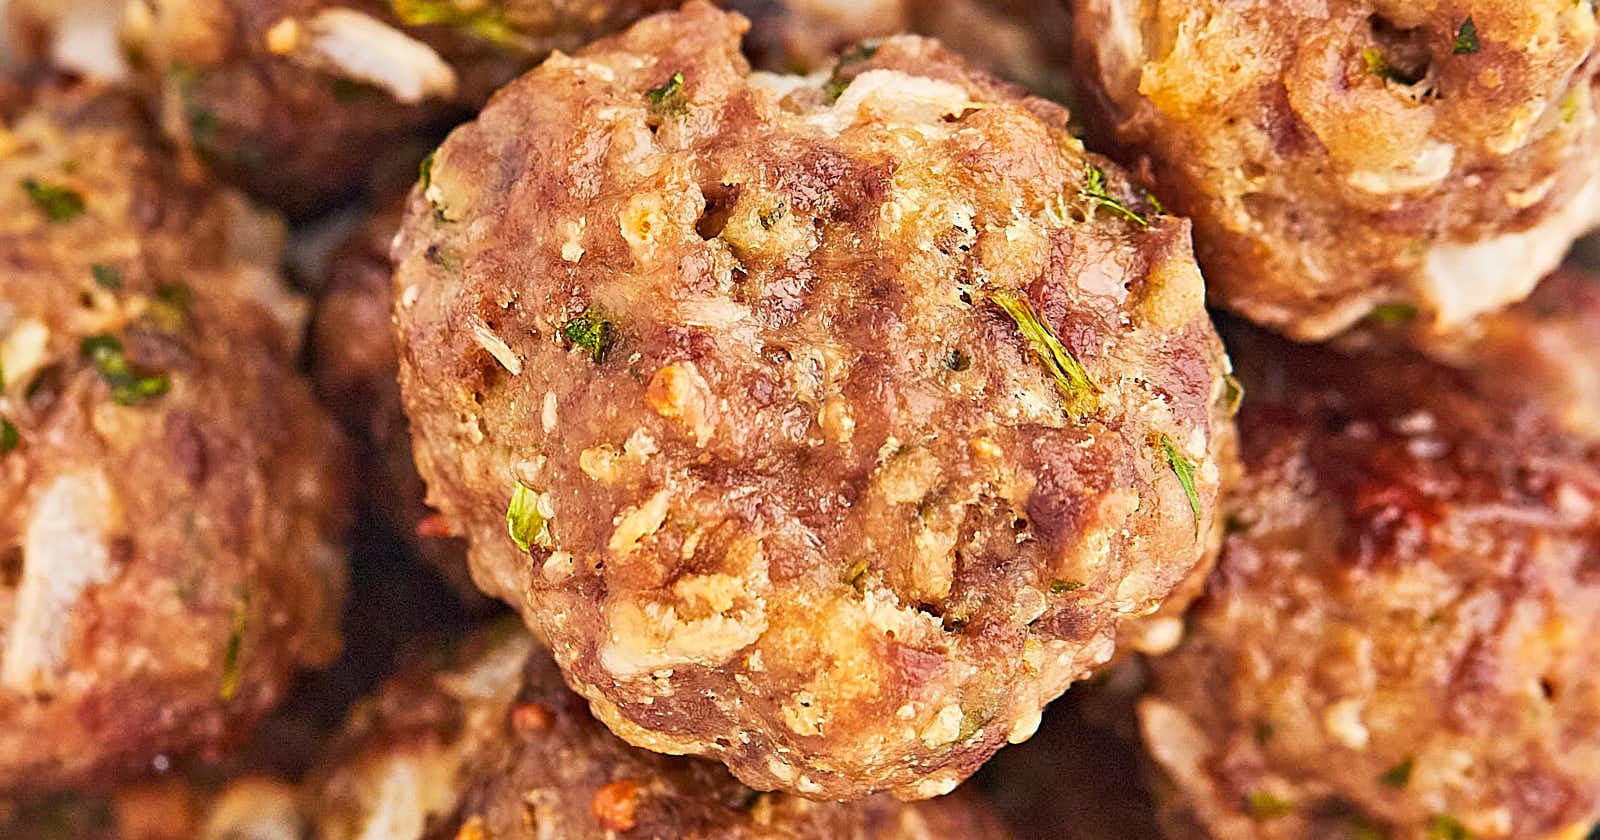 Baked Meatball recipe by Cheerful Cook.